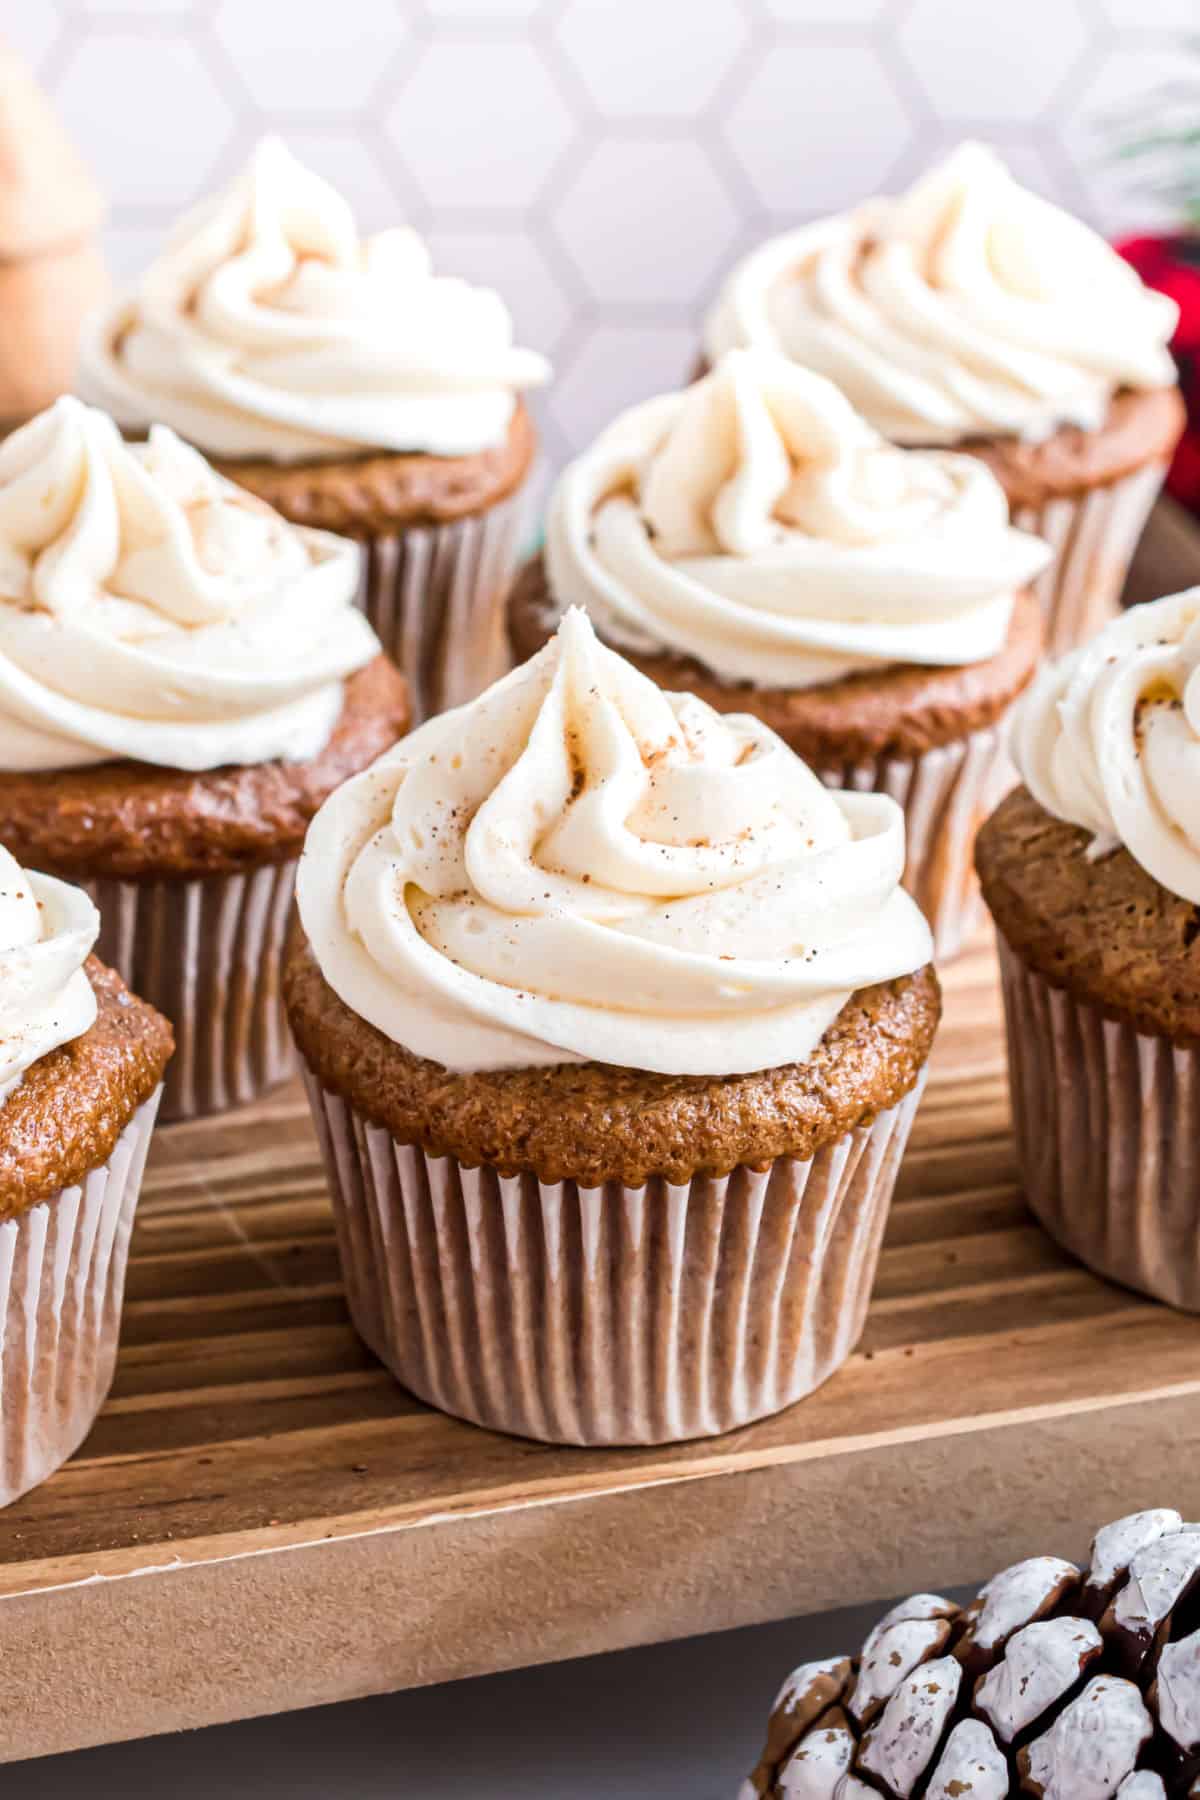 Gingerbread cupcakes on a wooden serving board.